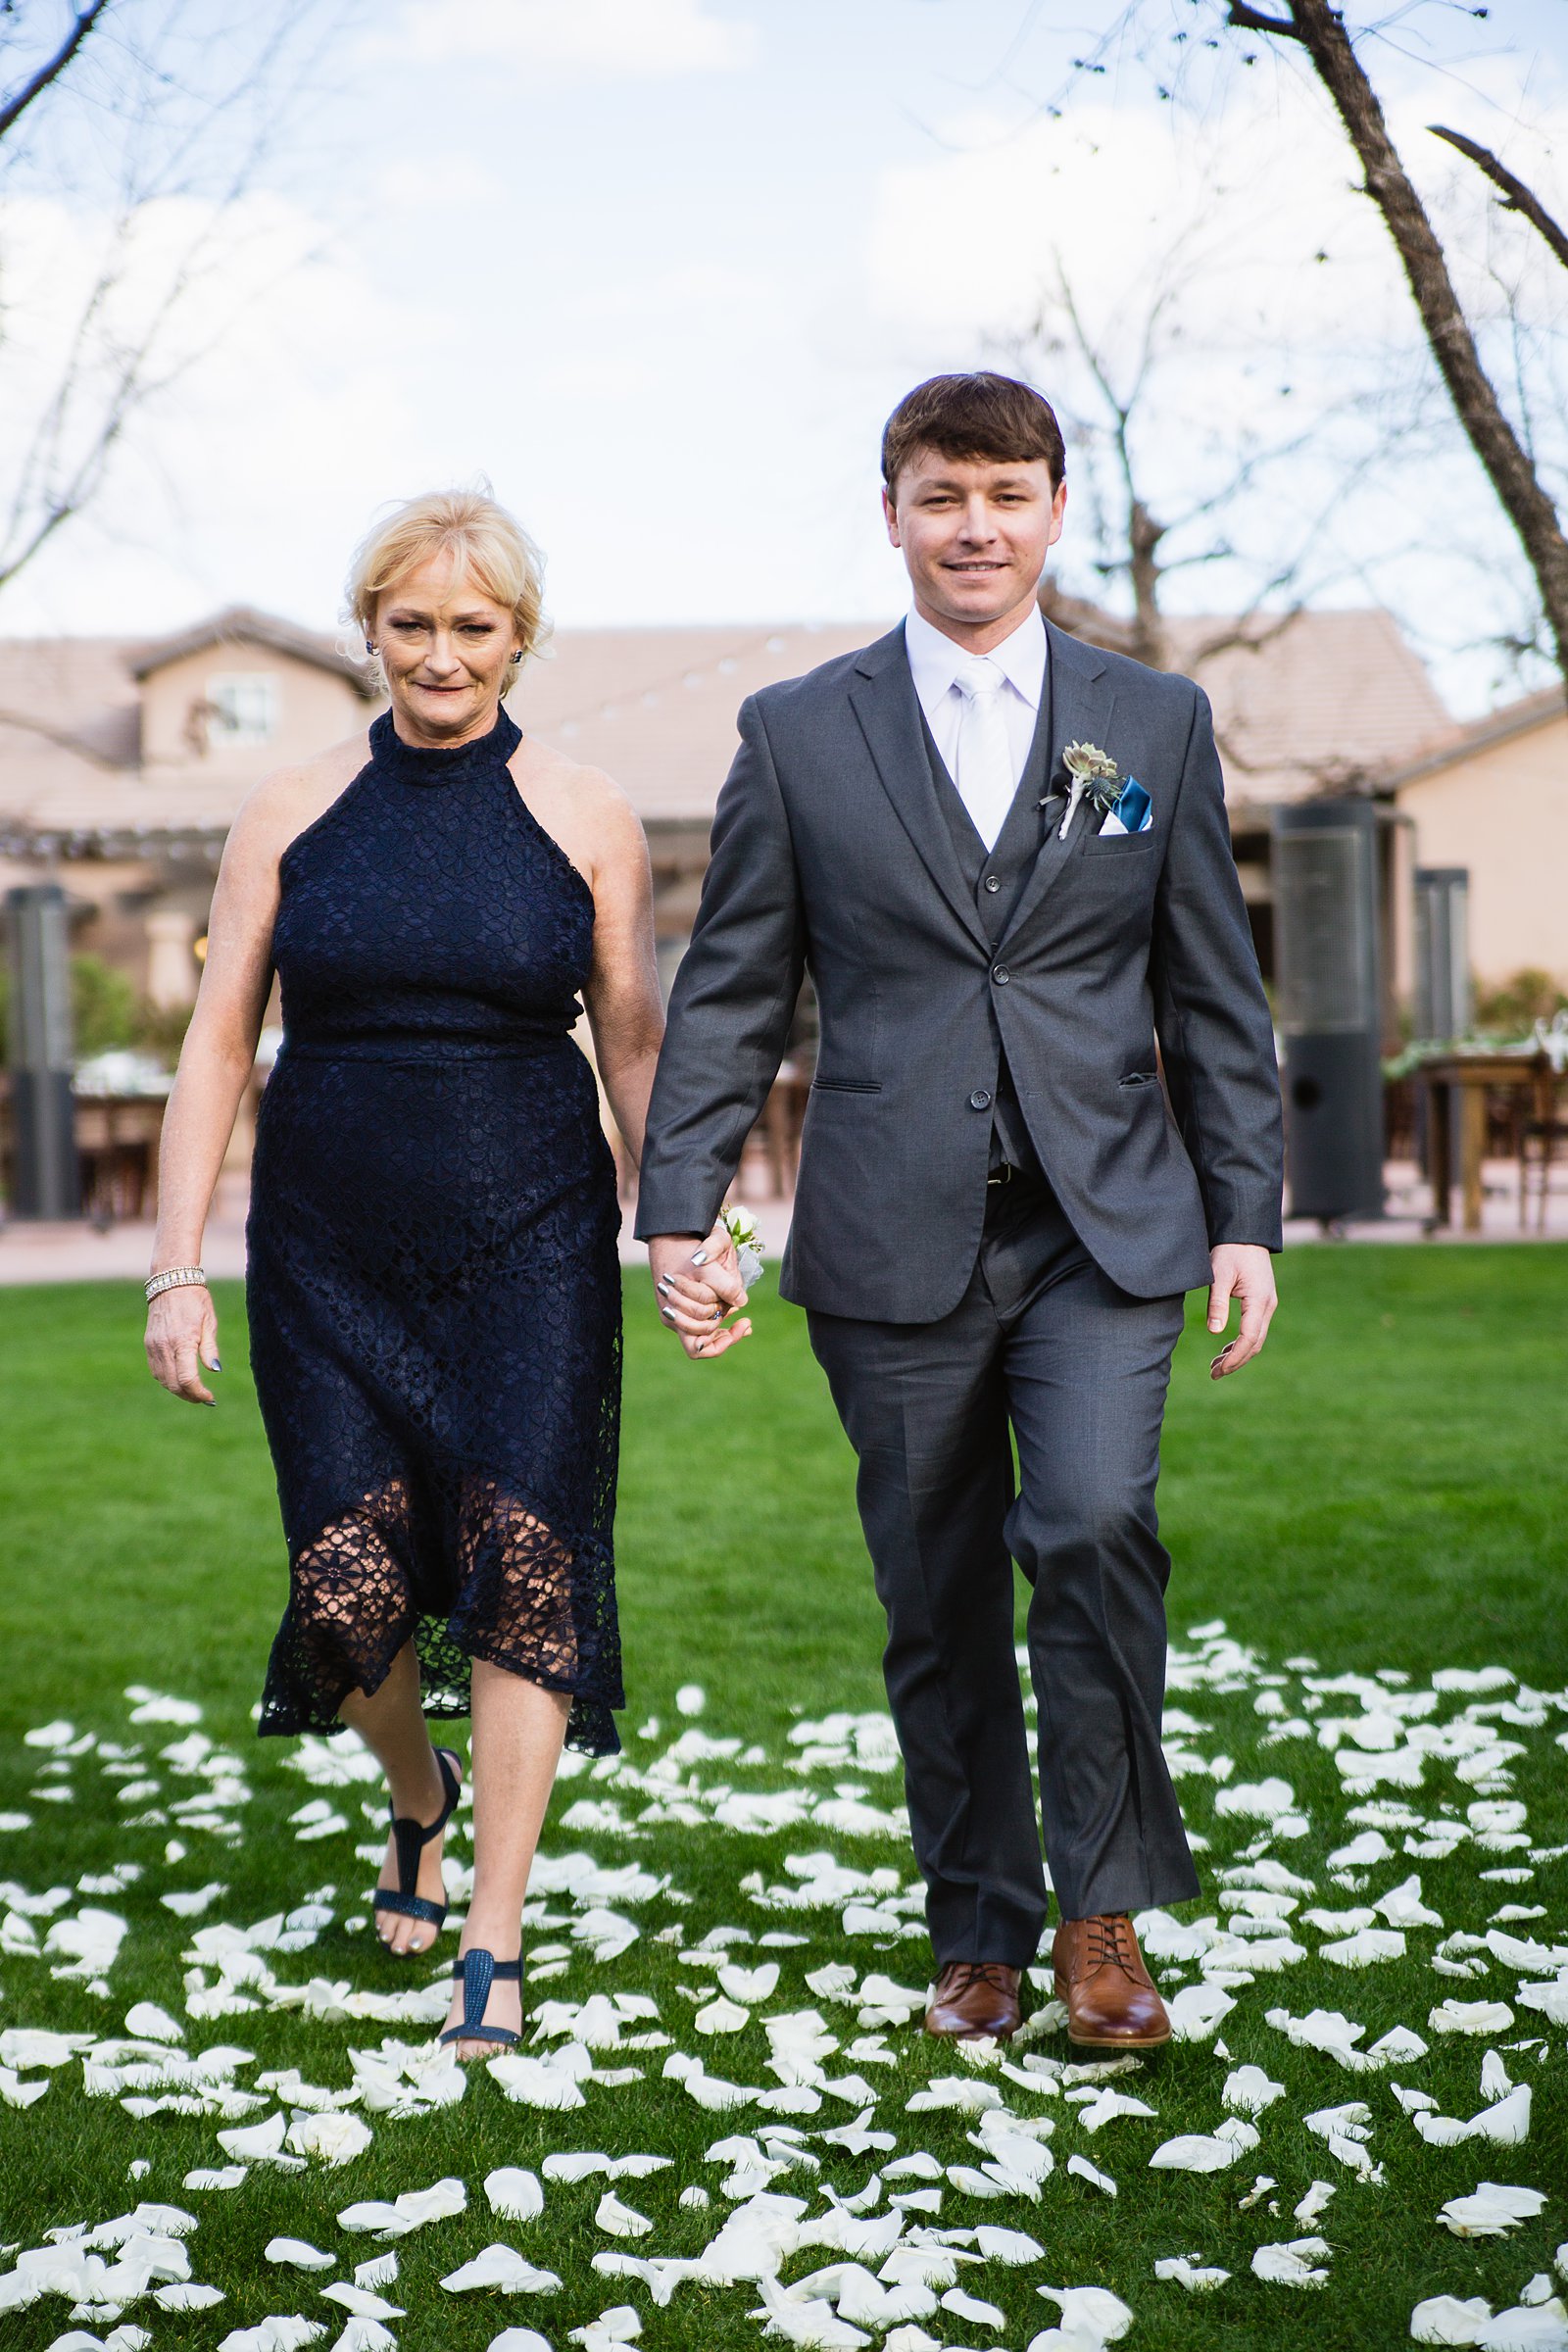 Groom walking down aisle with is mother during Venue At The Grove wedding ceremony by Arizona wedding photographer PMA Photography.